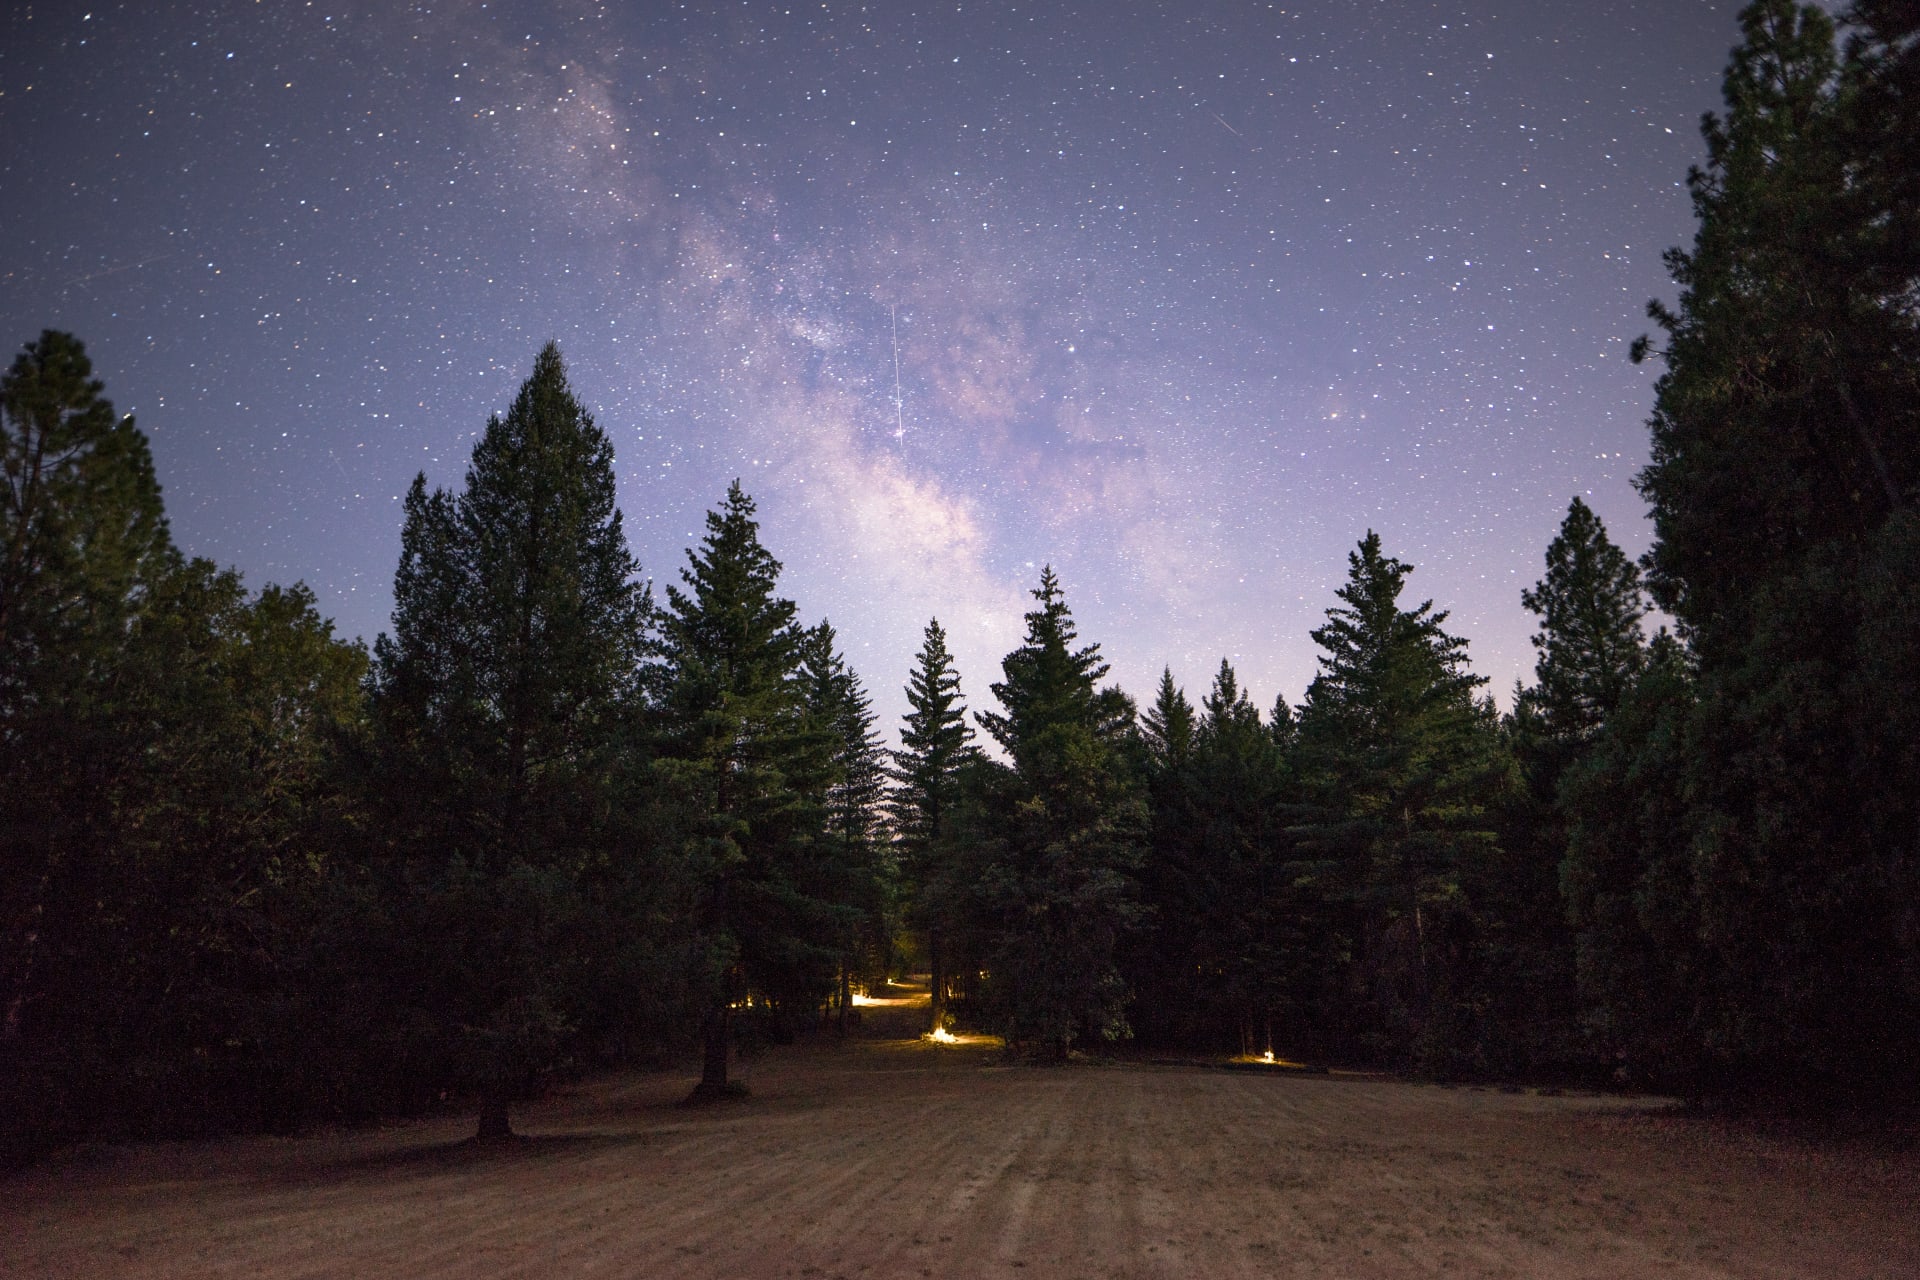 A wide open field next to the campsites provides the perfect viewing opportunity of the night sky